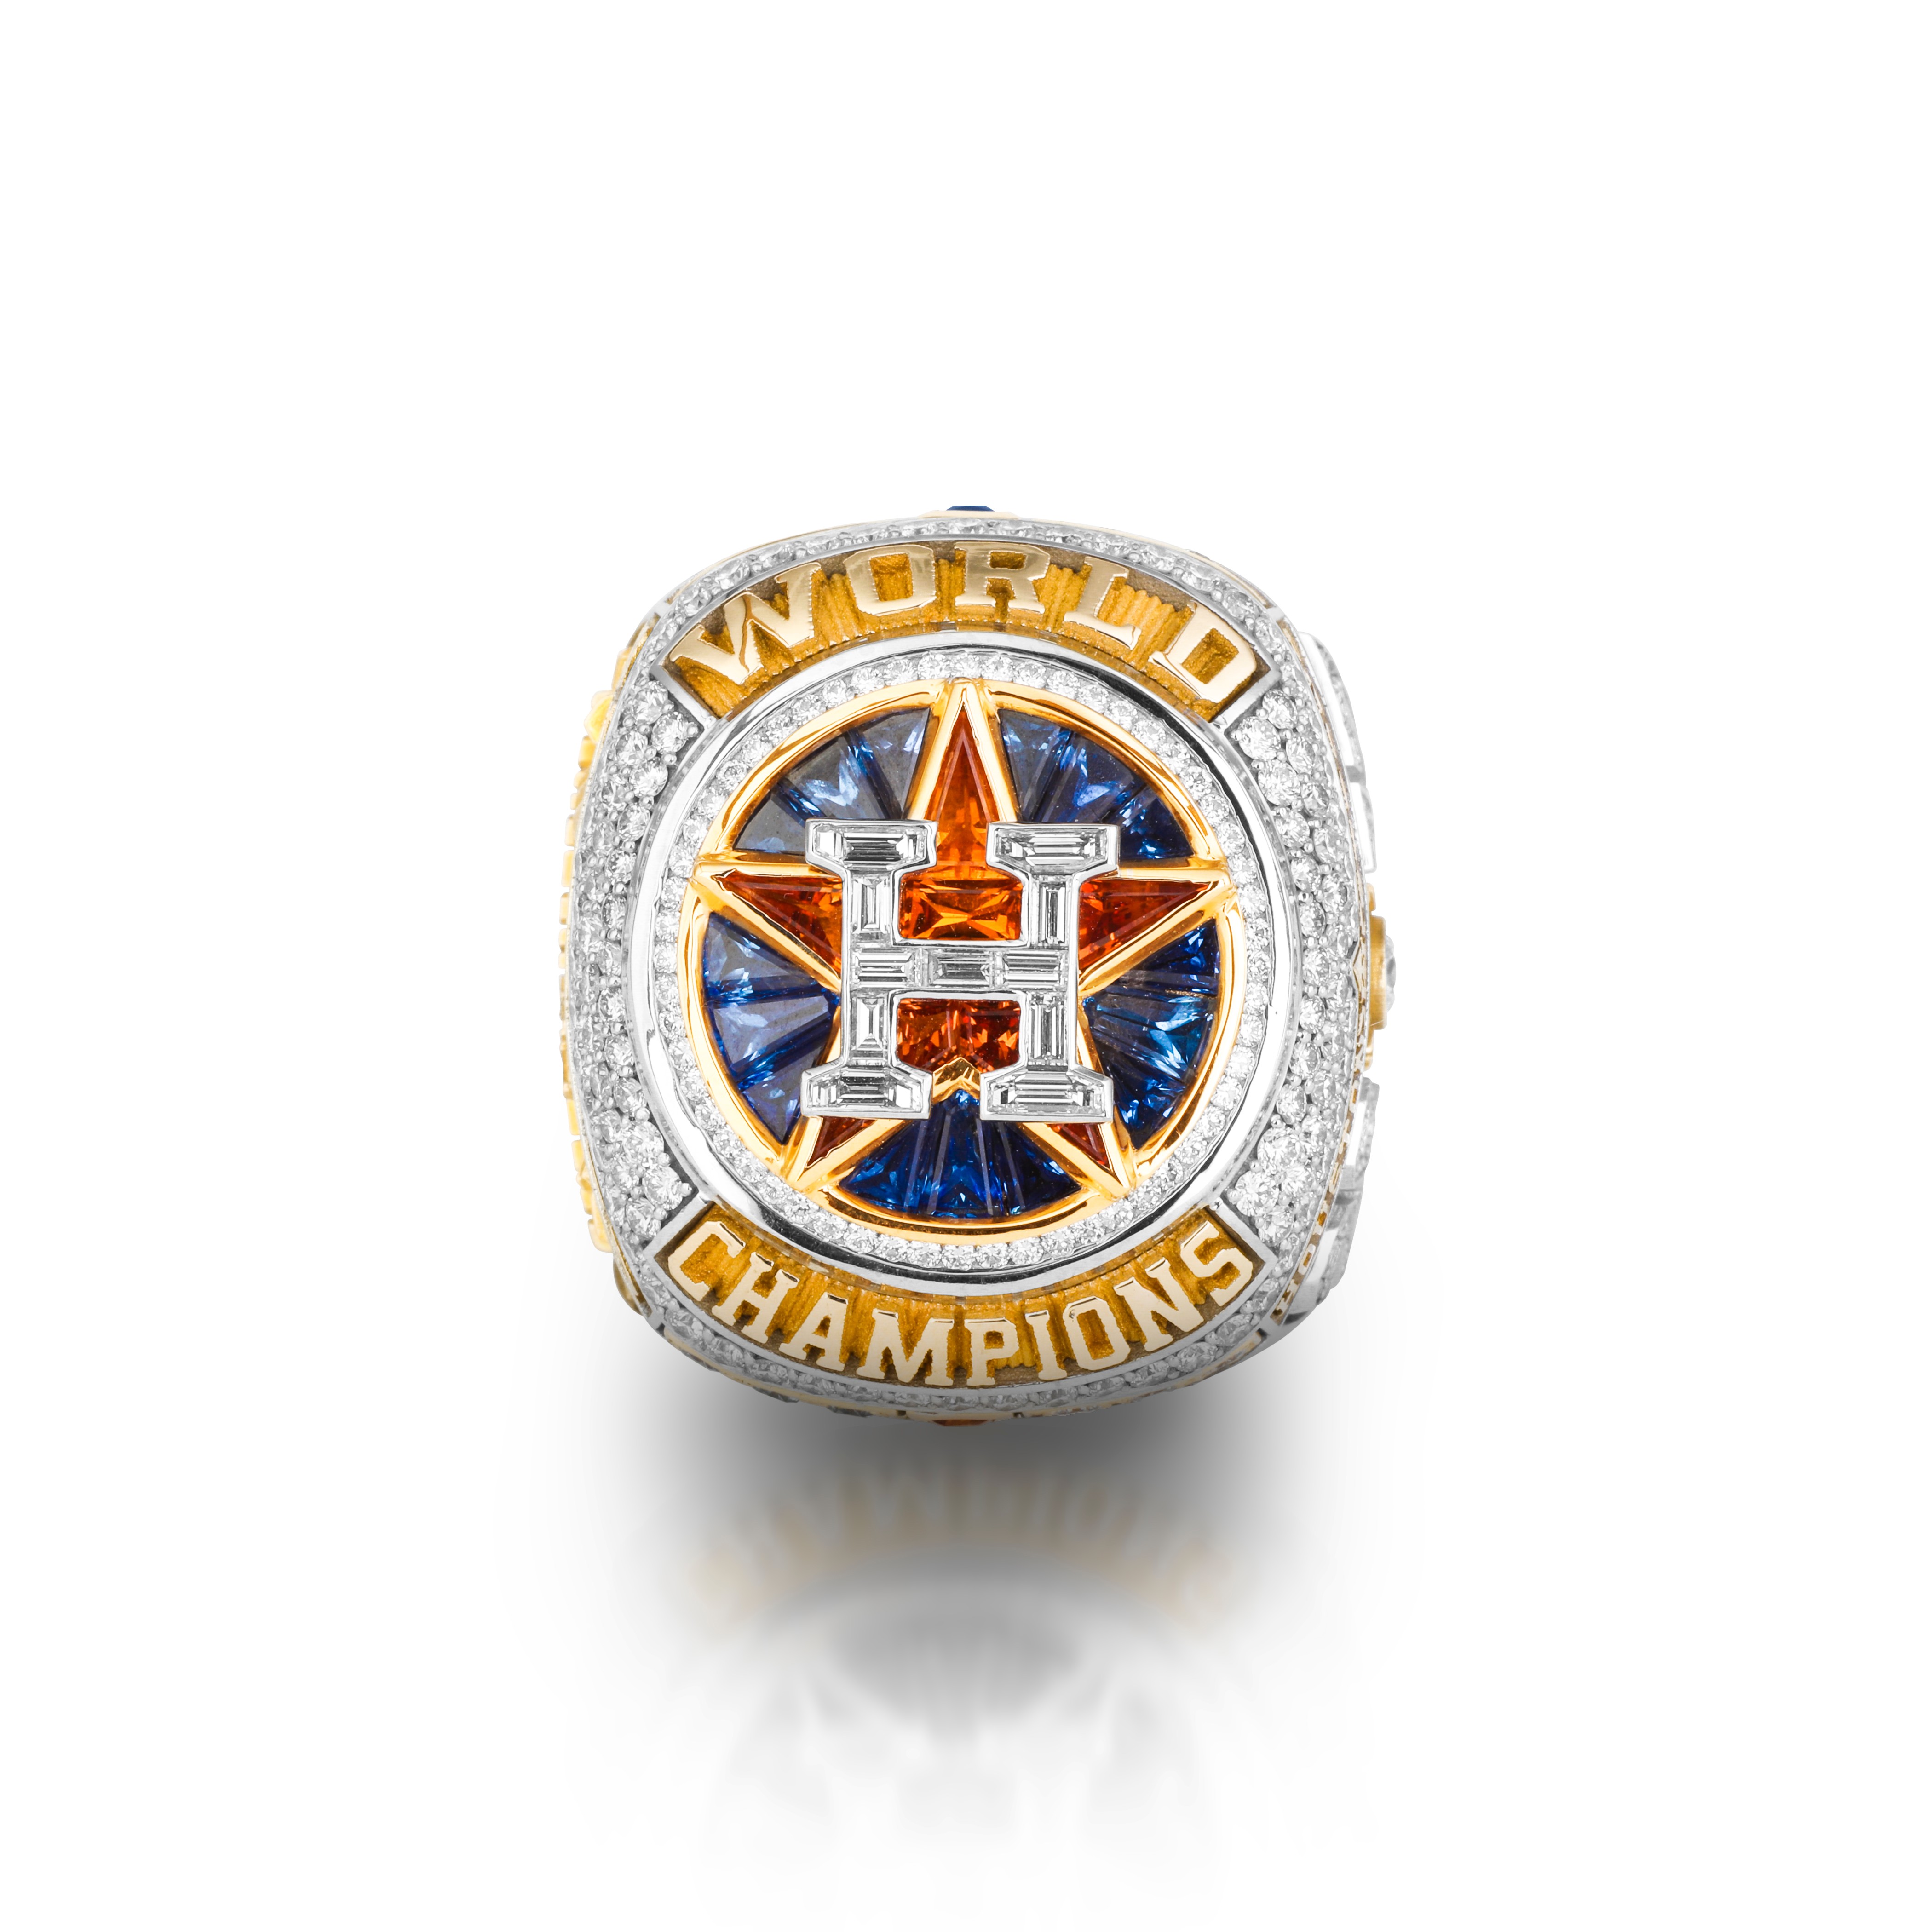 Houston Astros World Series ring design shrouded in mystery ahead of